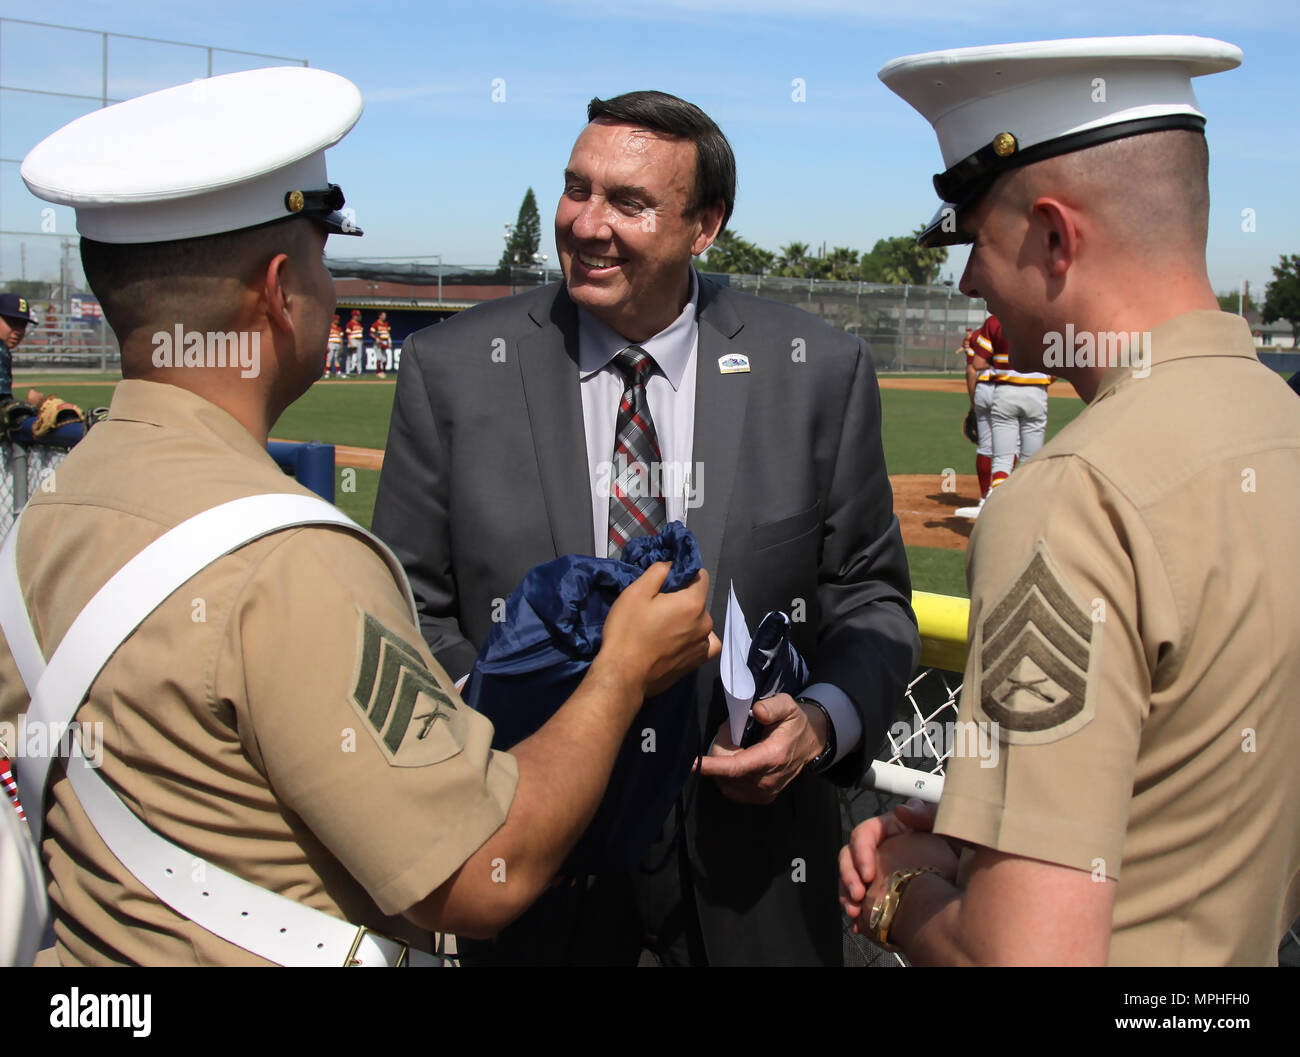 Marine Corps Recruiters SSgt. Phillip Page and Sgt. Victor Romauldo of Recruiting Substation Lakewood present a gift of appreciation for the Honorable Dan Koops, Mayor of Bellflower City, before a baseball varsity game at St. John Bosco High School in Bellflower, Calif., March 14, 2017. Stock Photo